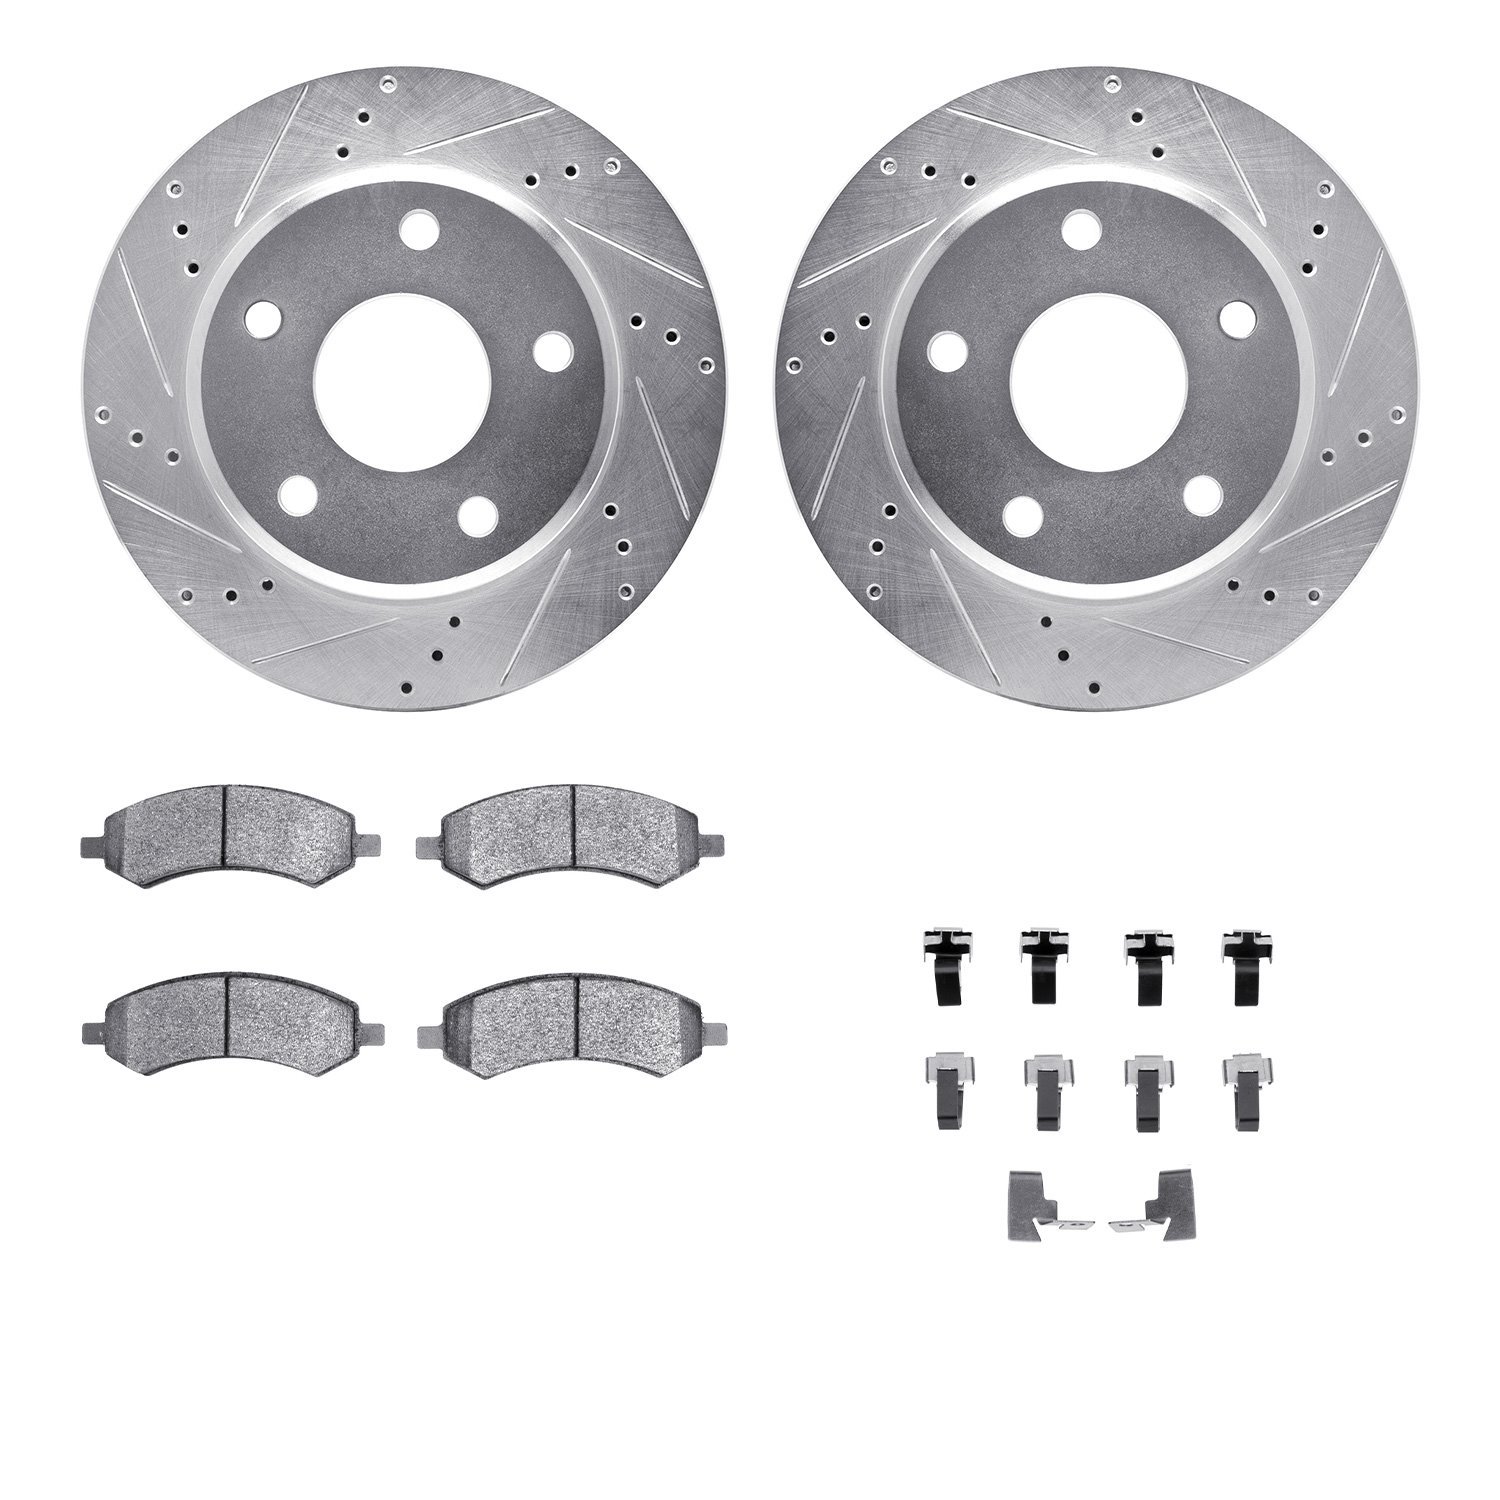 7412-40018 Drilled/Slotted Brake Rotors with Ultimate-Duty Brake Pads Kit & Hardware [Silver], 2005-2010 Multiple Makes/Models,